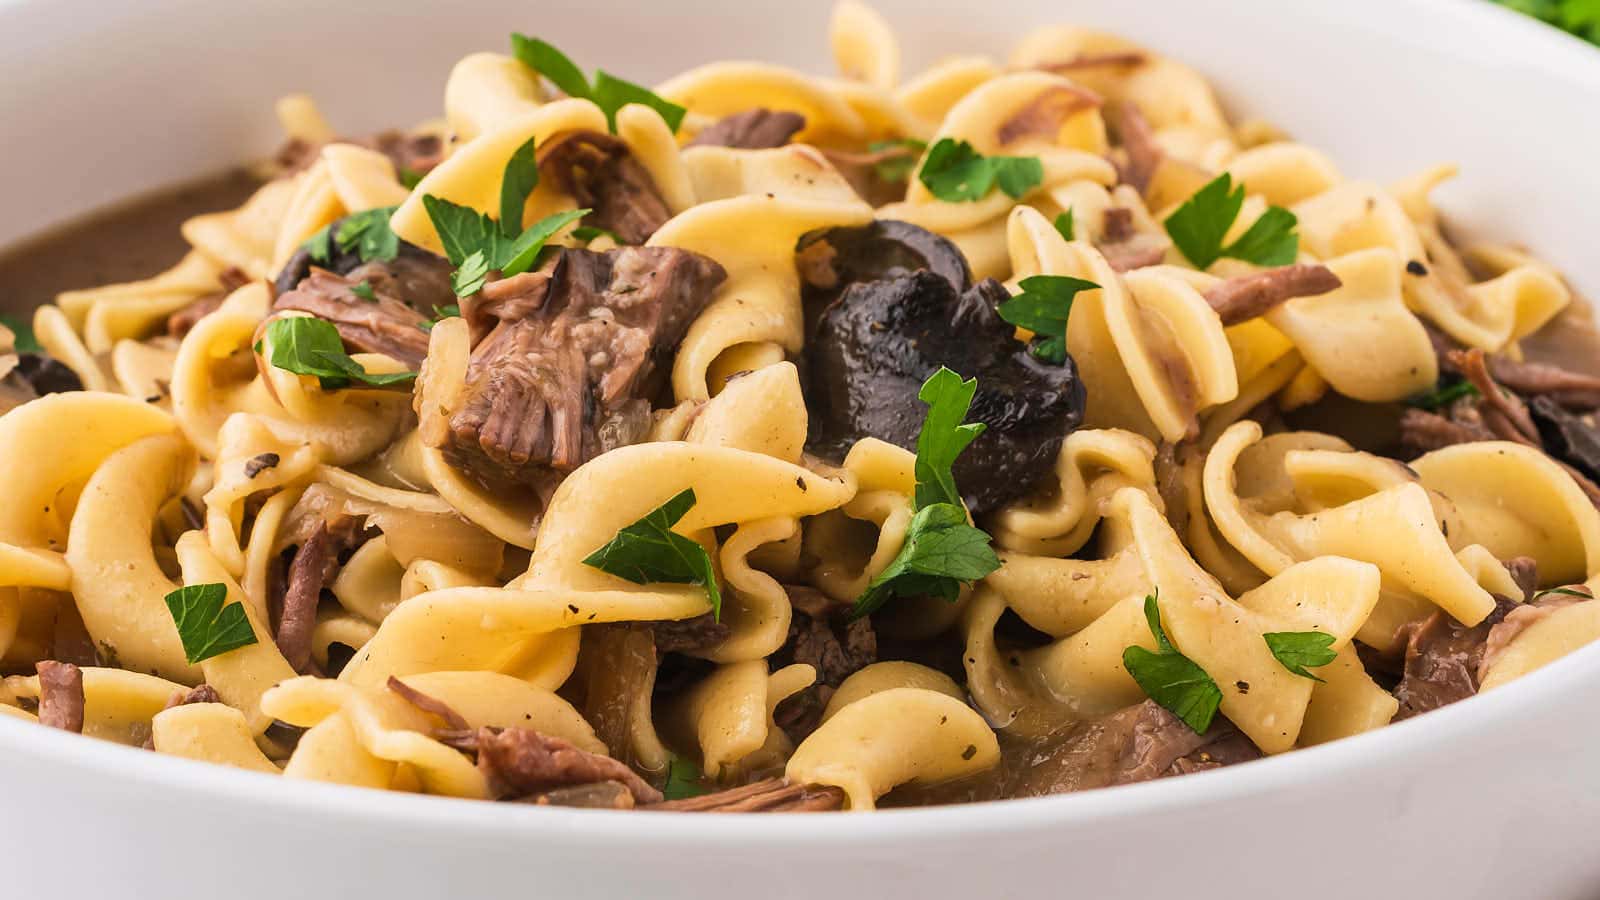 Crock Pot Beef and Noodles recipe by Cheerful Cook.